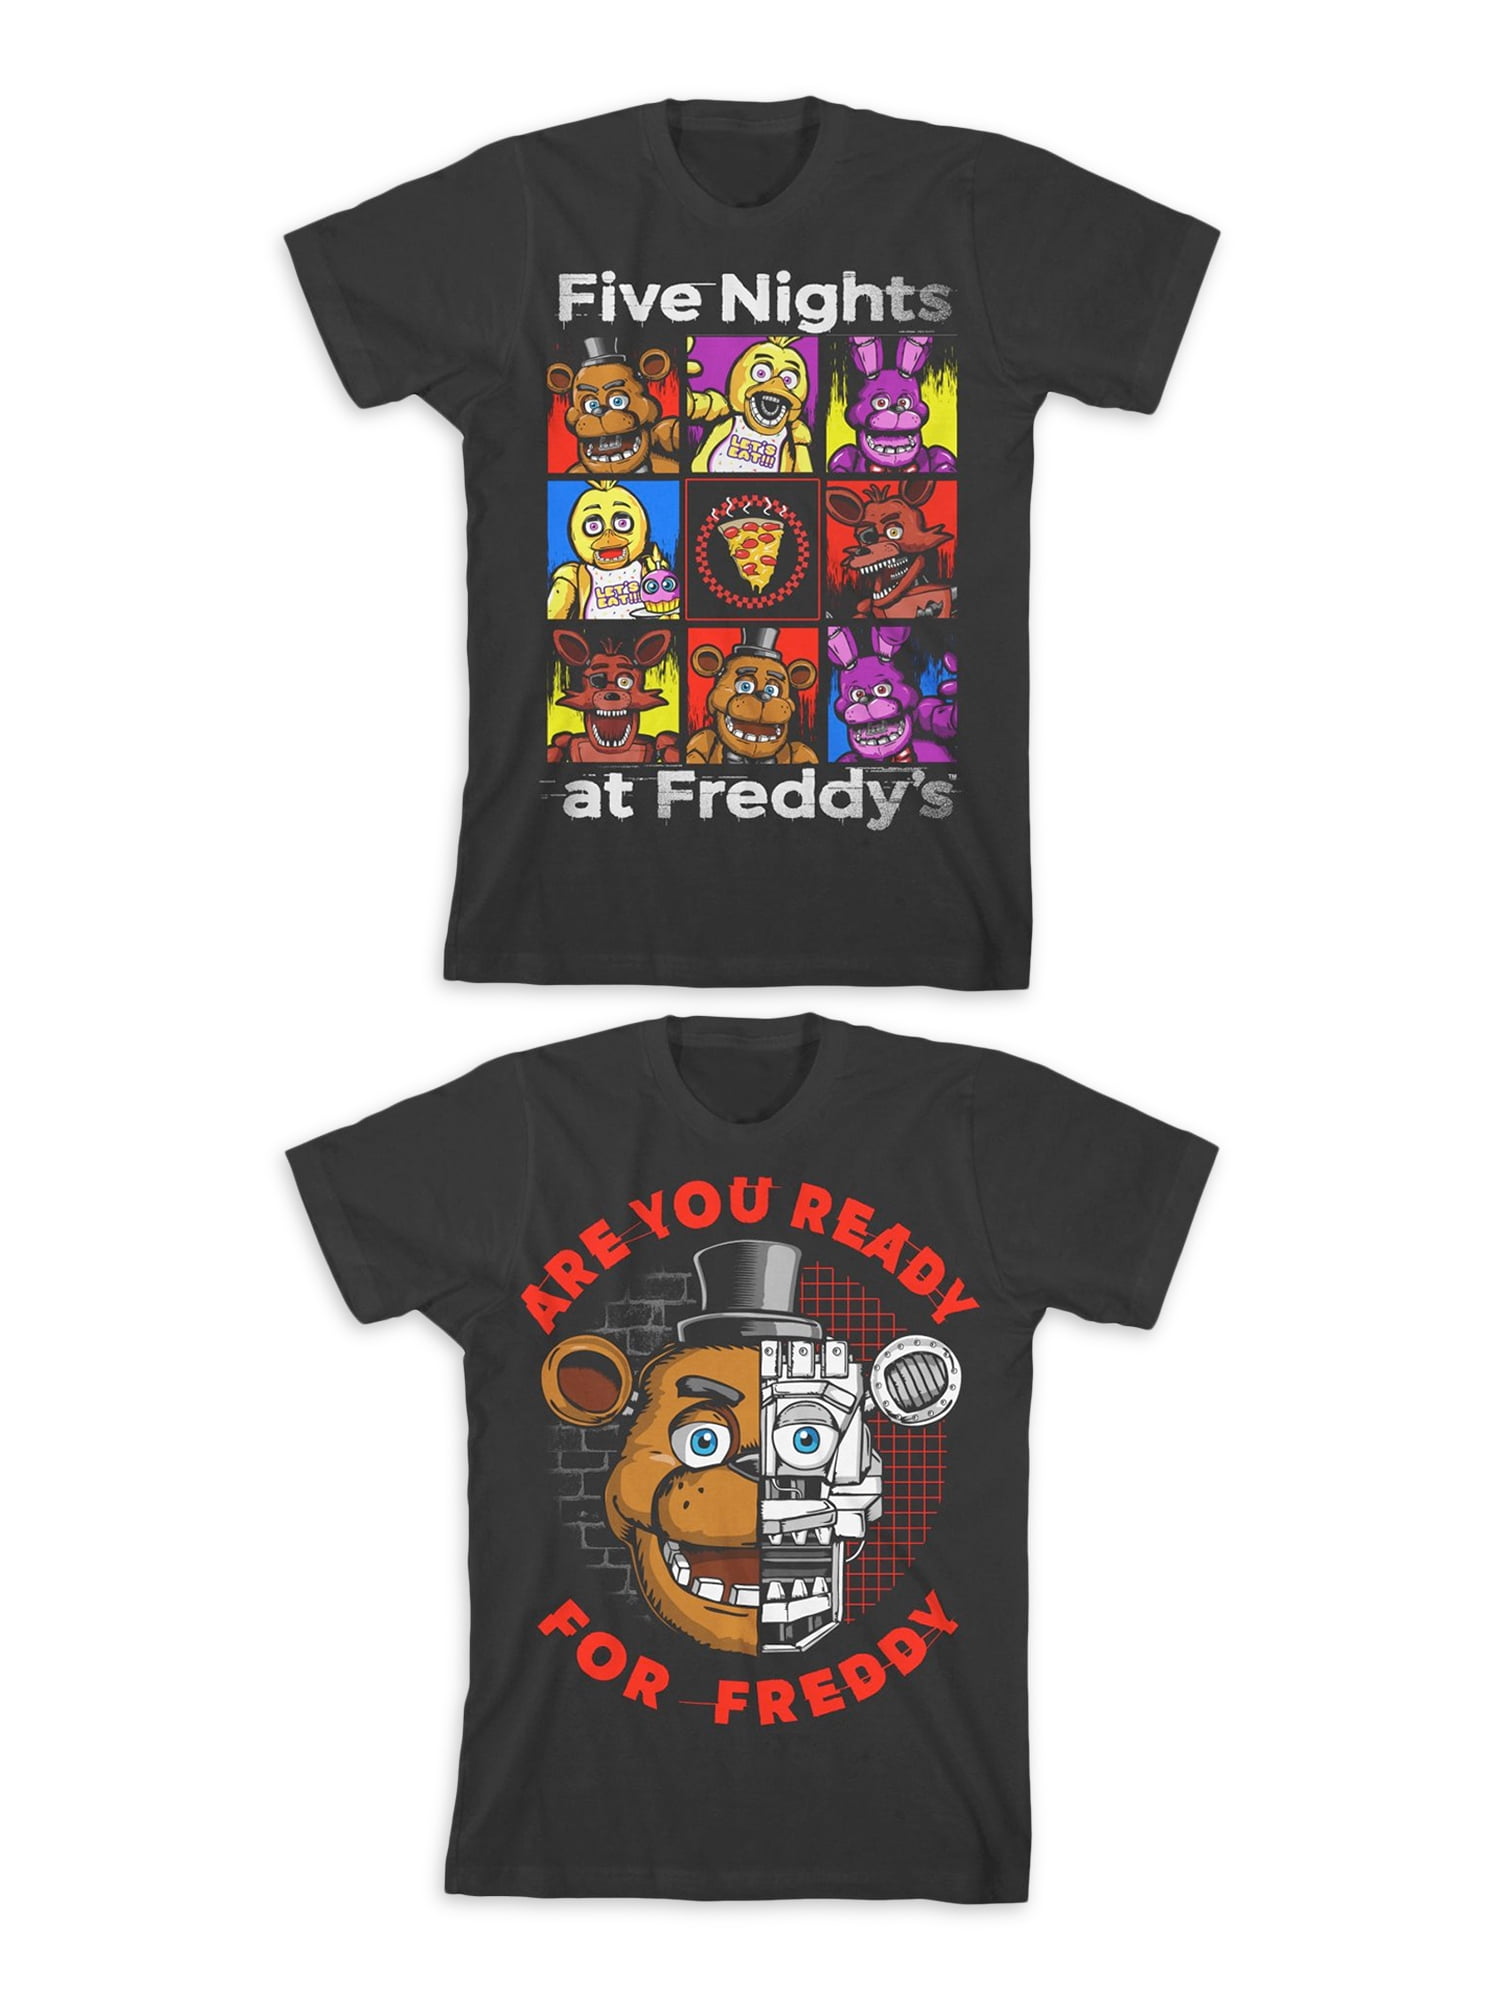 Five Nights at Freddy's t-shirt for Kids Boys Girls Video Game Tee Tops 4 6 8 10 